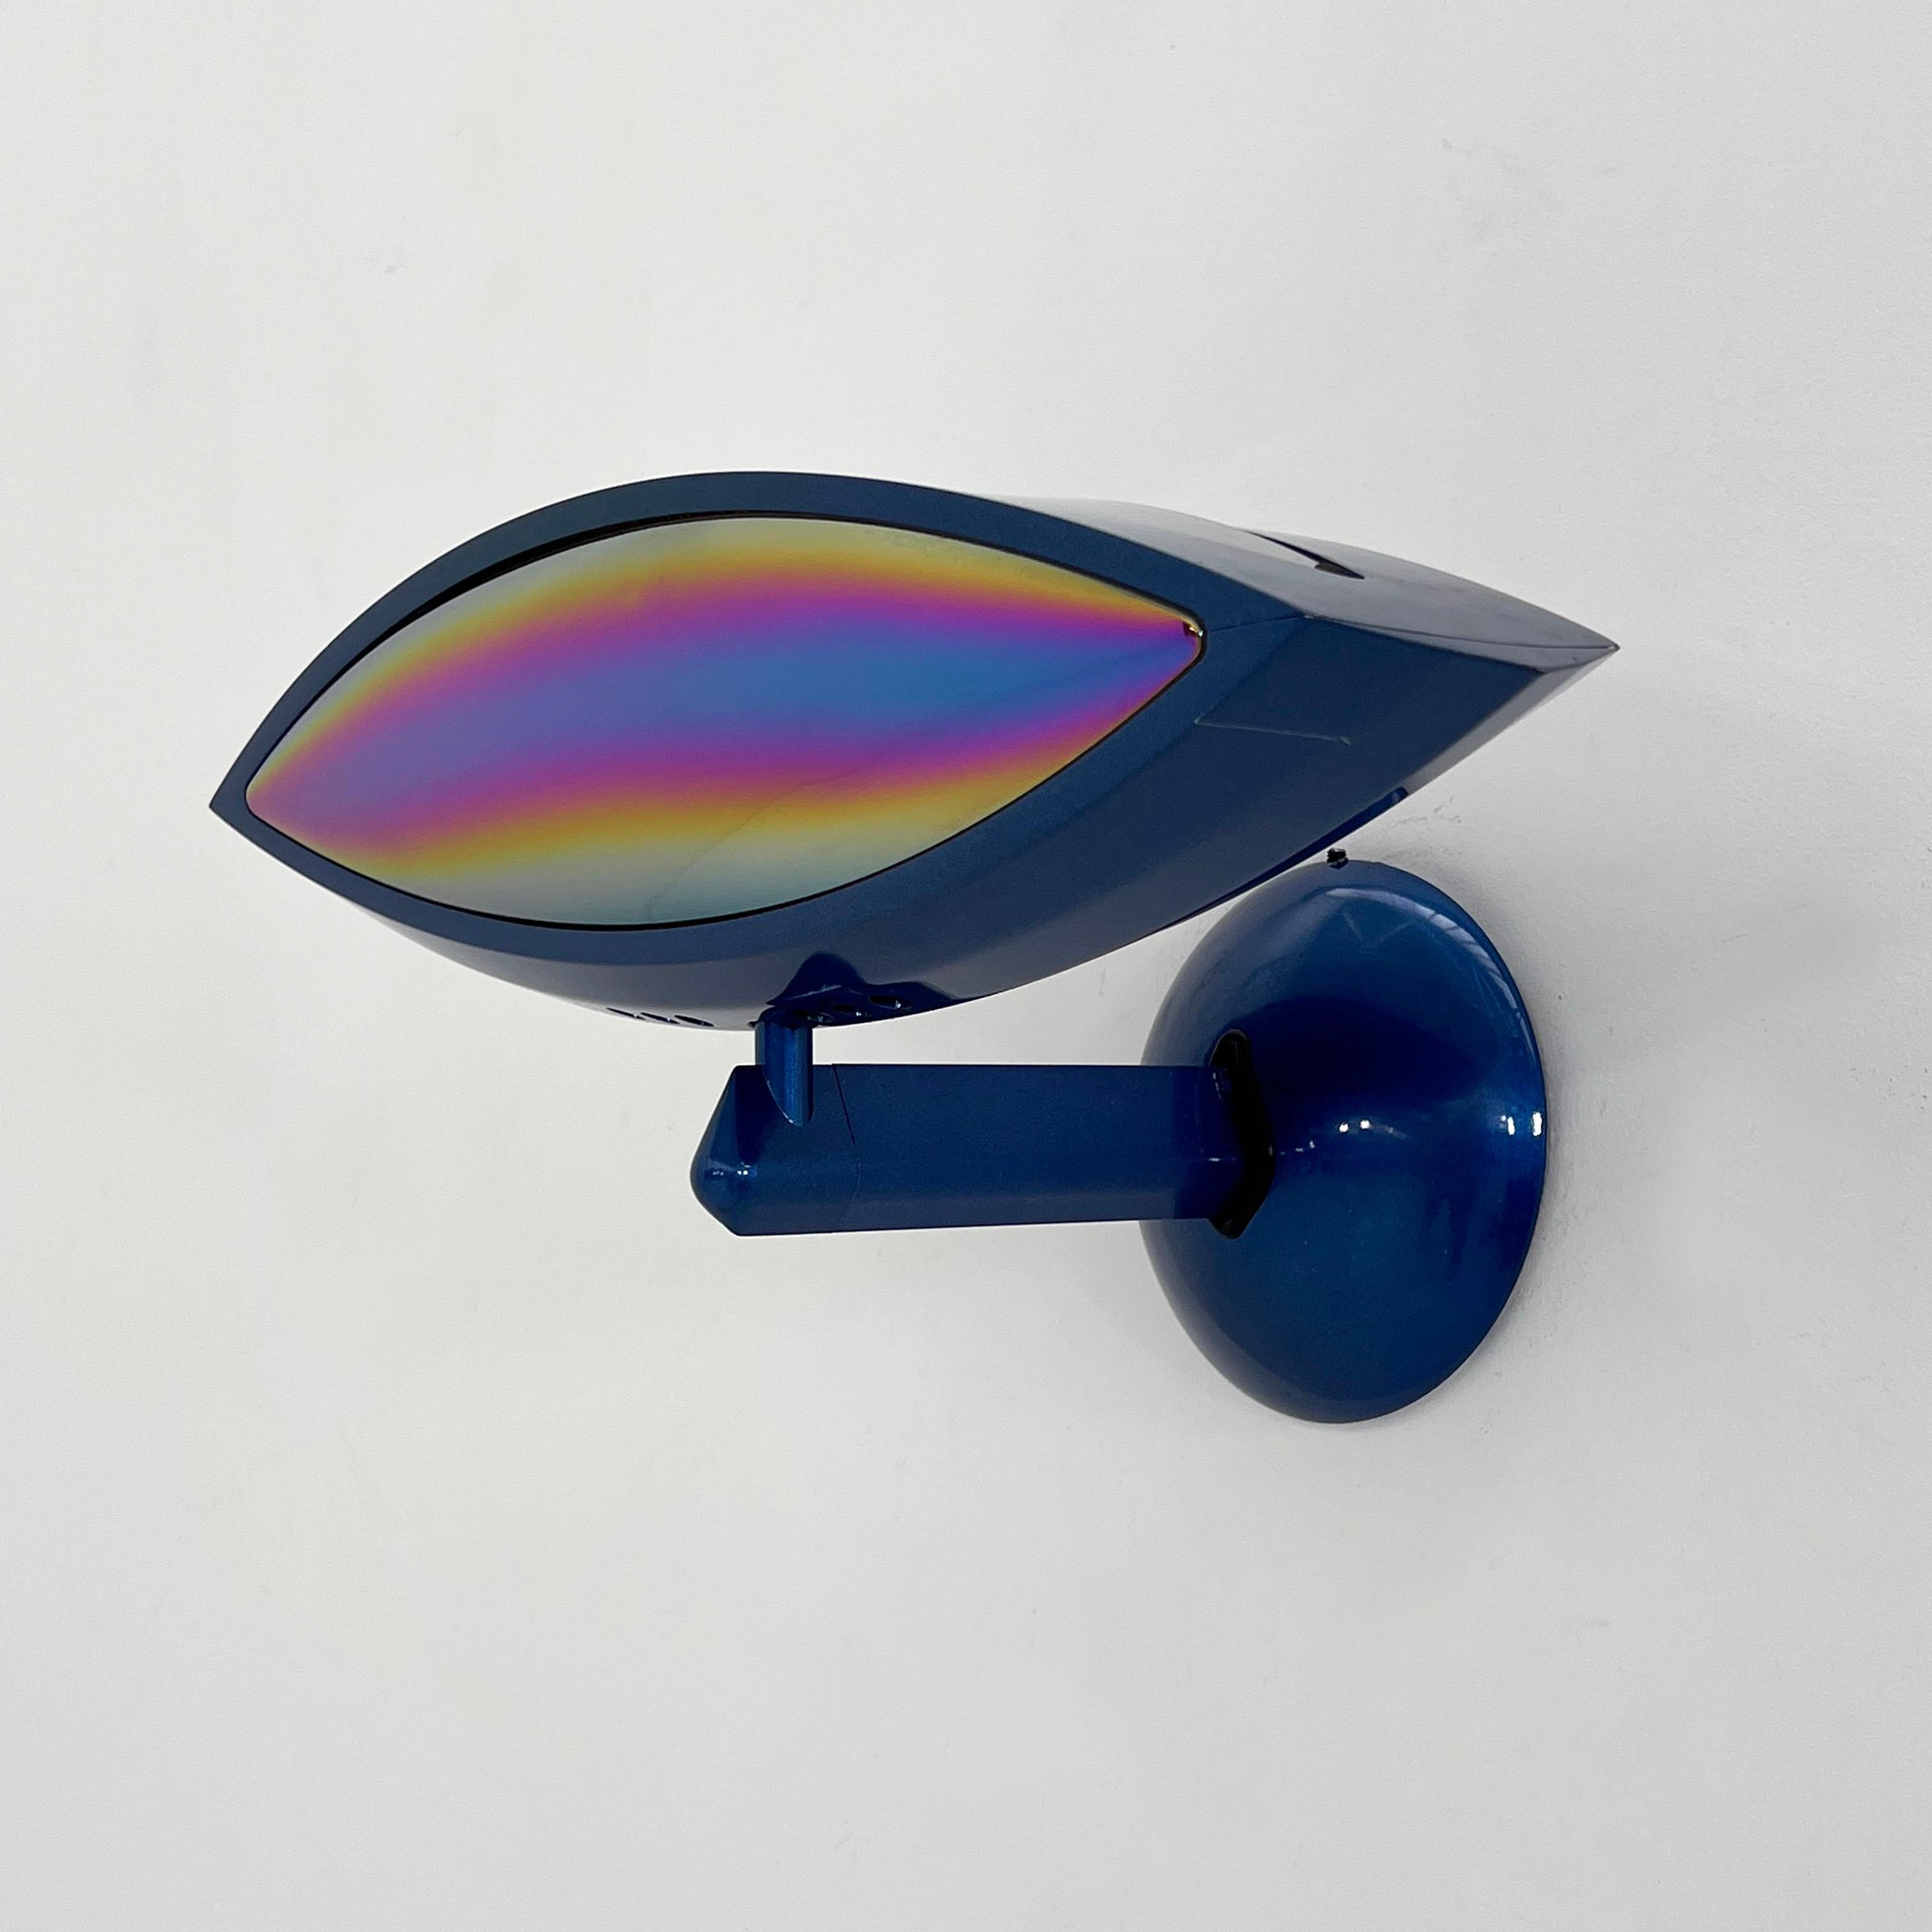 Blue Aeto Wall Lamp by Fabio Lombardo for Flos, 1980s

2 pieces available - Price is per piece 
Designer - Fabio Lombardo
Producer - Flos
Model - Aeto Wall Lamp
Design Period - Eighties
Measurements - Width 45 cm x Depth 25 cm x Height 20